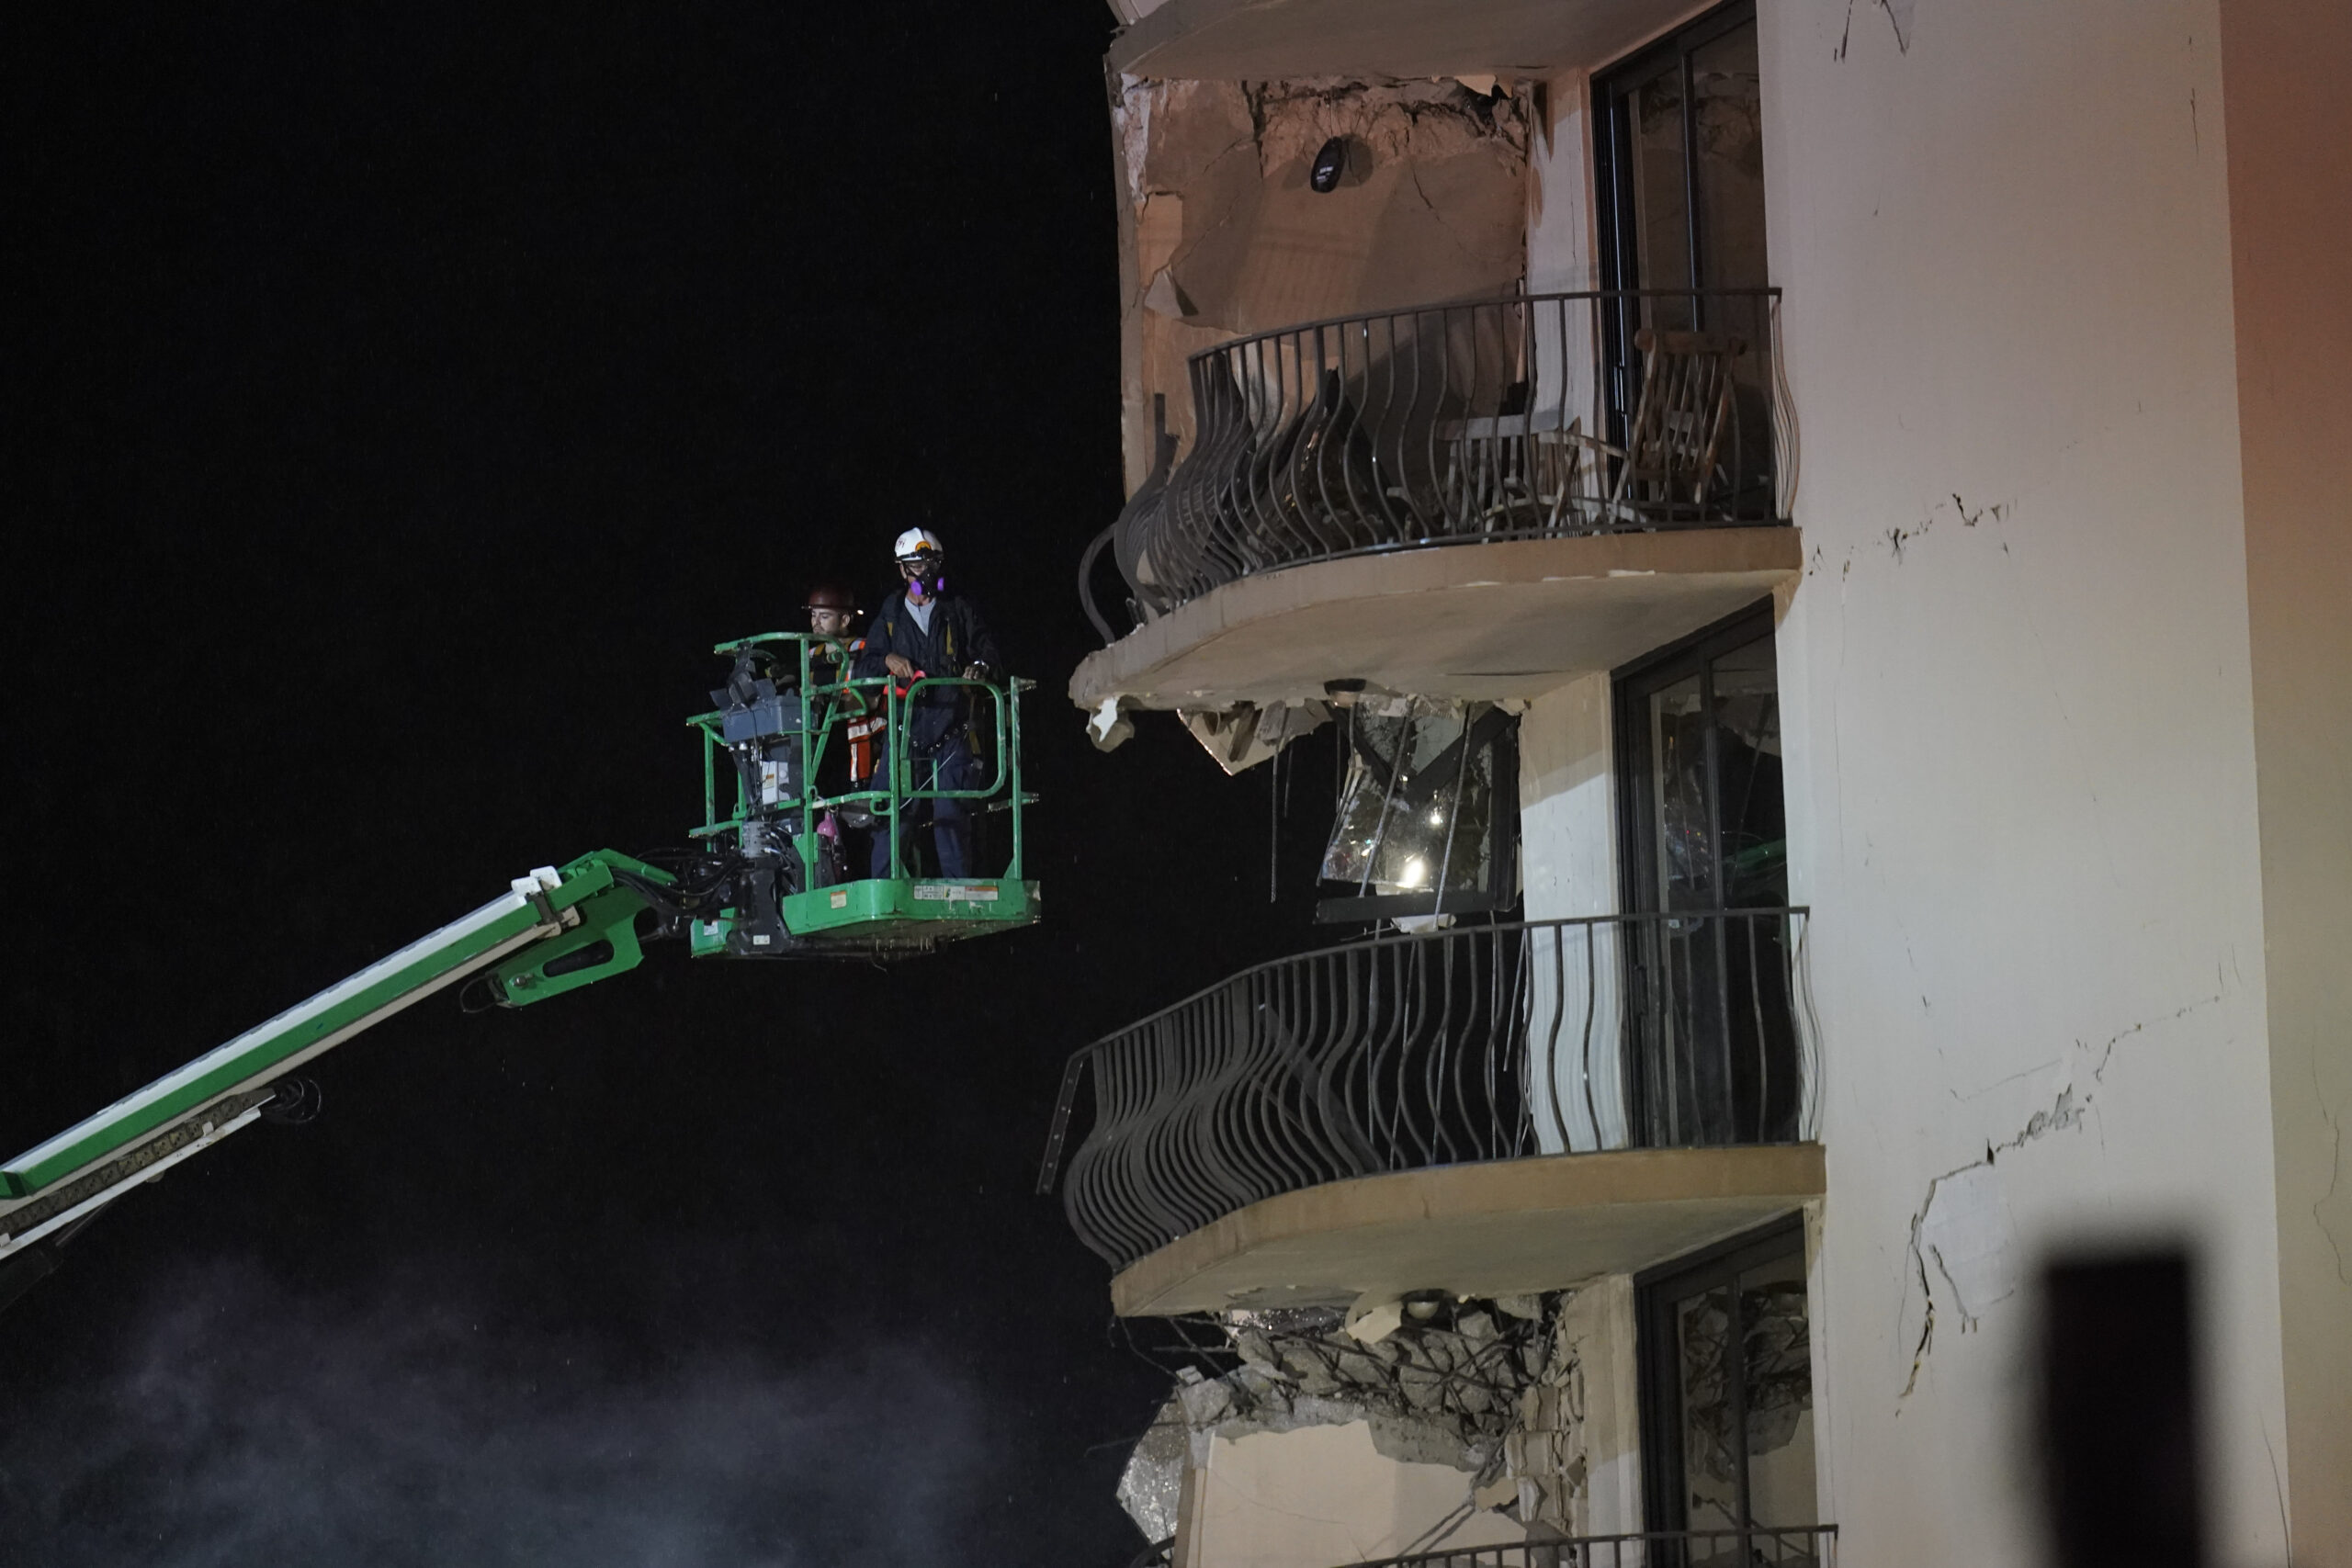 Workers use a lift to investigate balconies in the still-standing portion of the building, as rescue efforts continue where a wing of a 12-story beachfront condo building collapsed, late on Thursday, June 24, 2021, in the Surfside area of Miami.(AP Photo/Gerald Herbert)